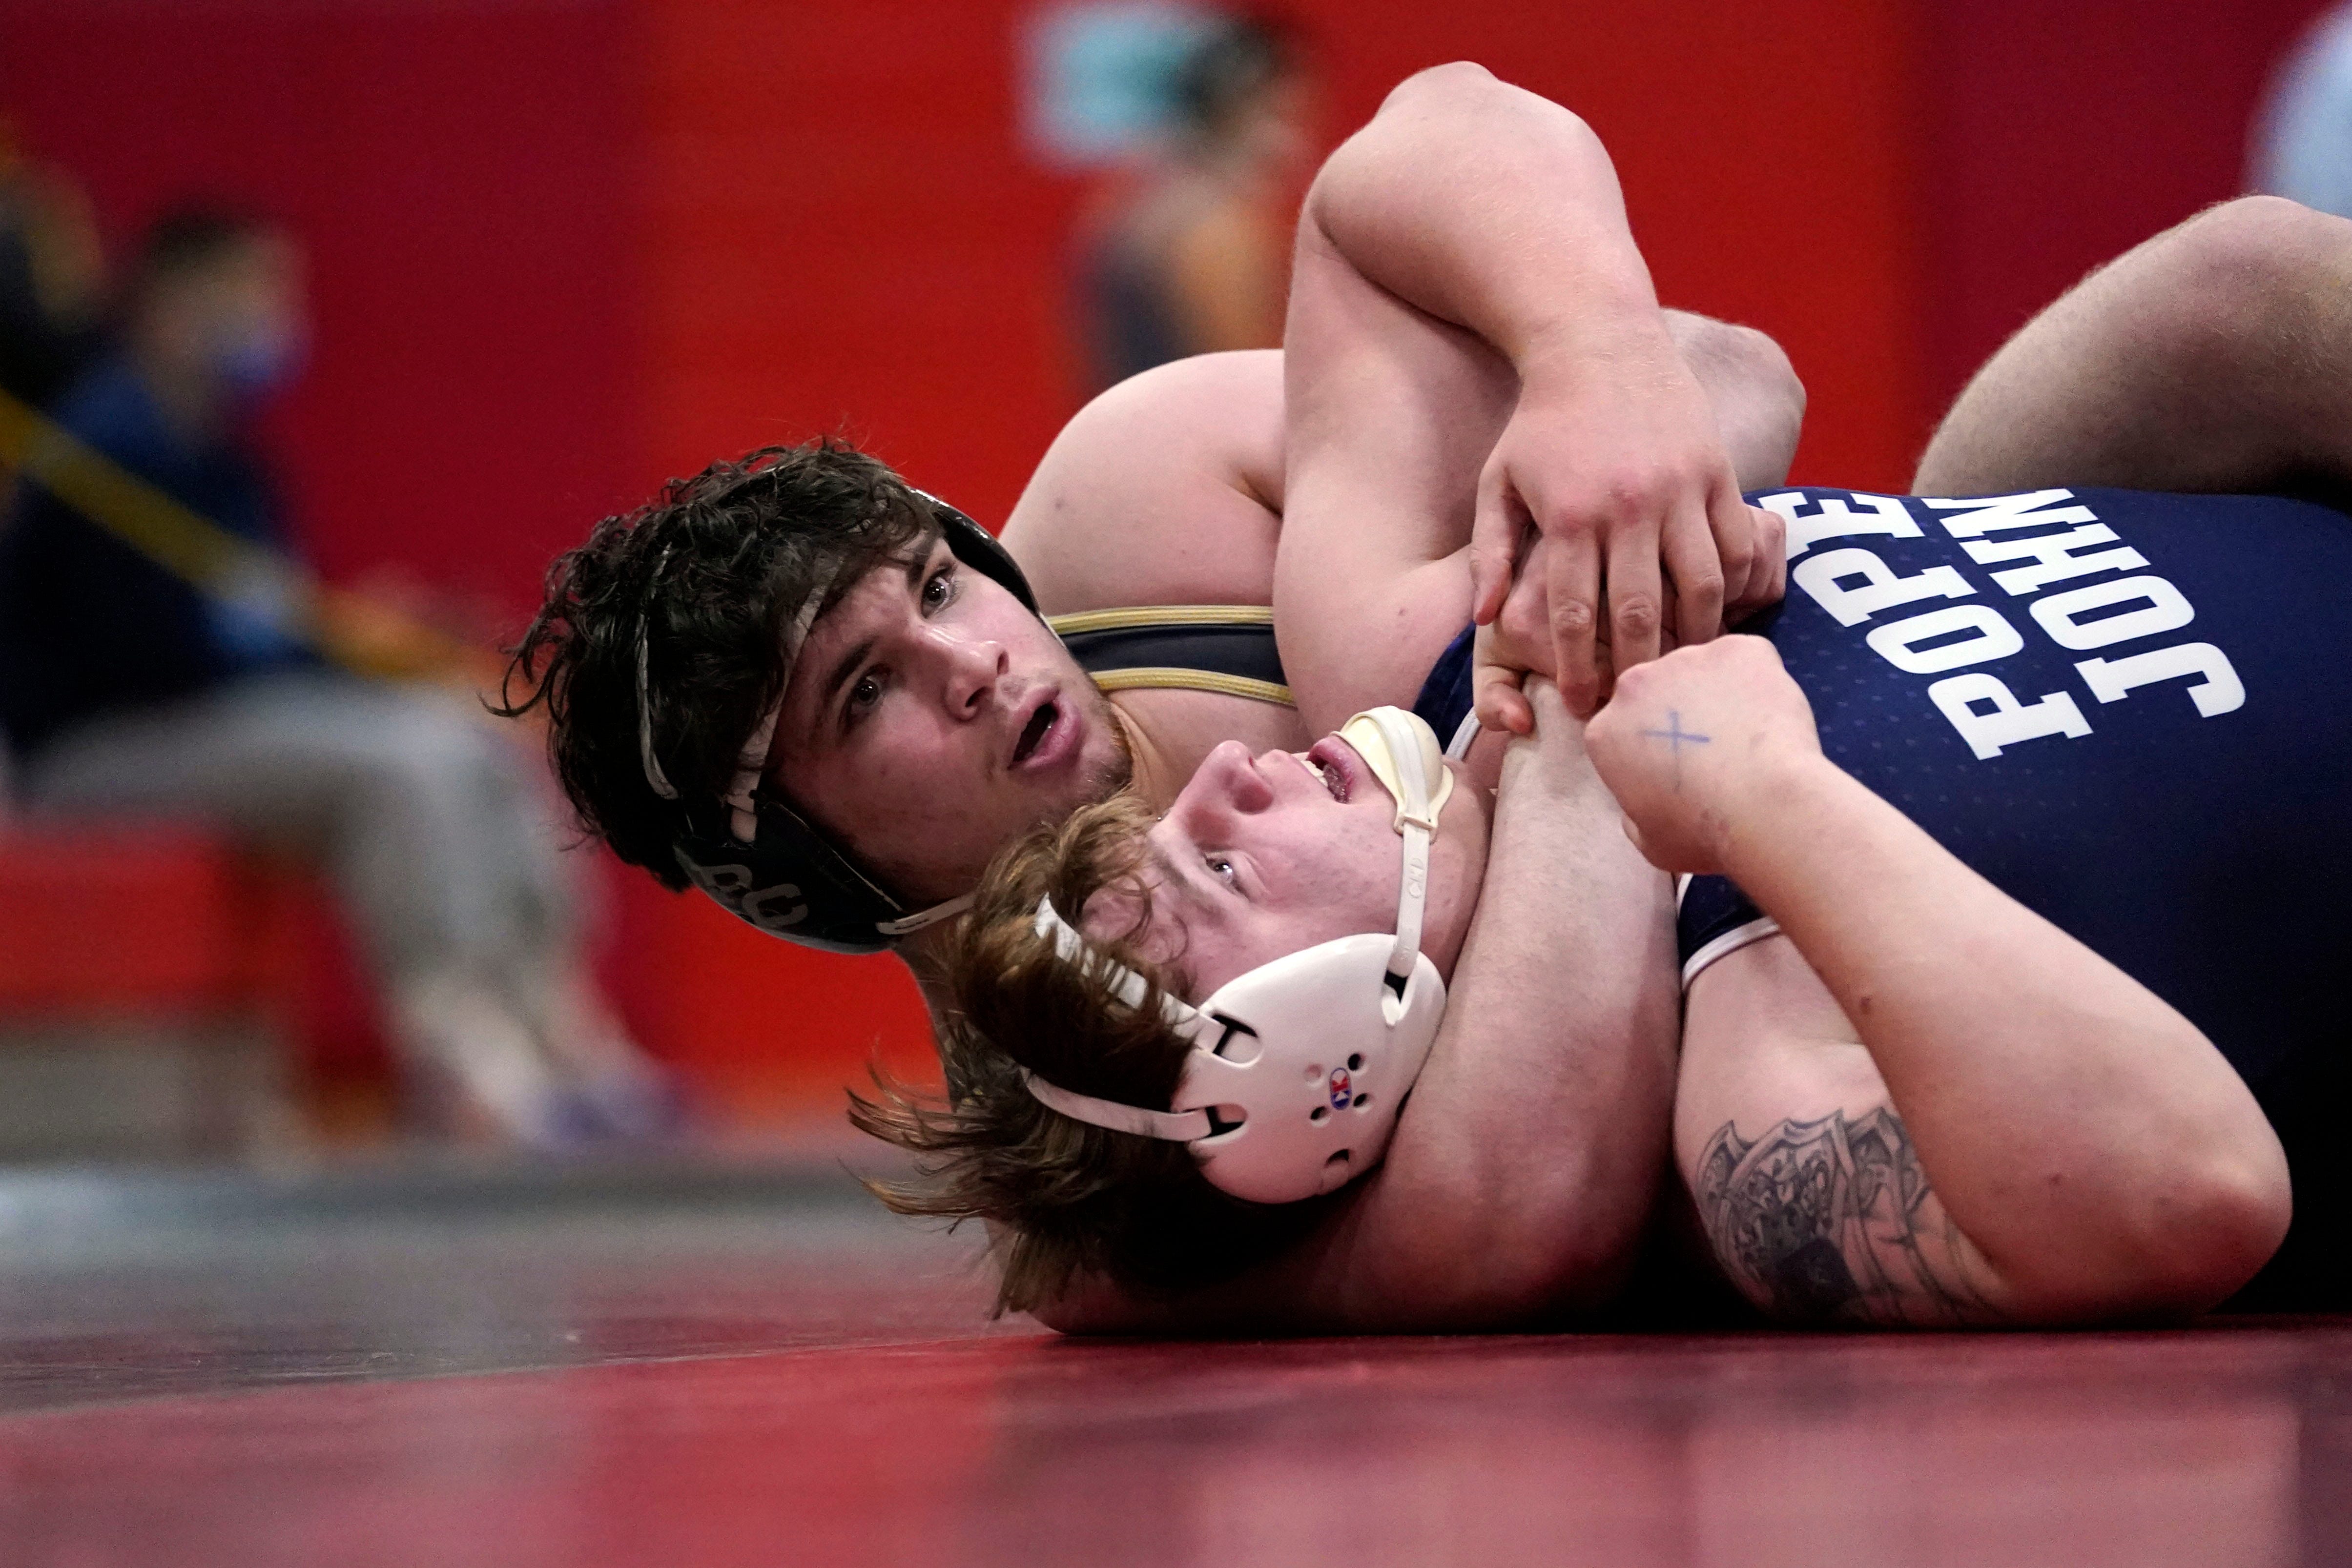 HS wrestling weight classes NFHS changes, adds girls